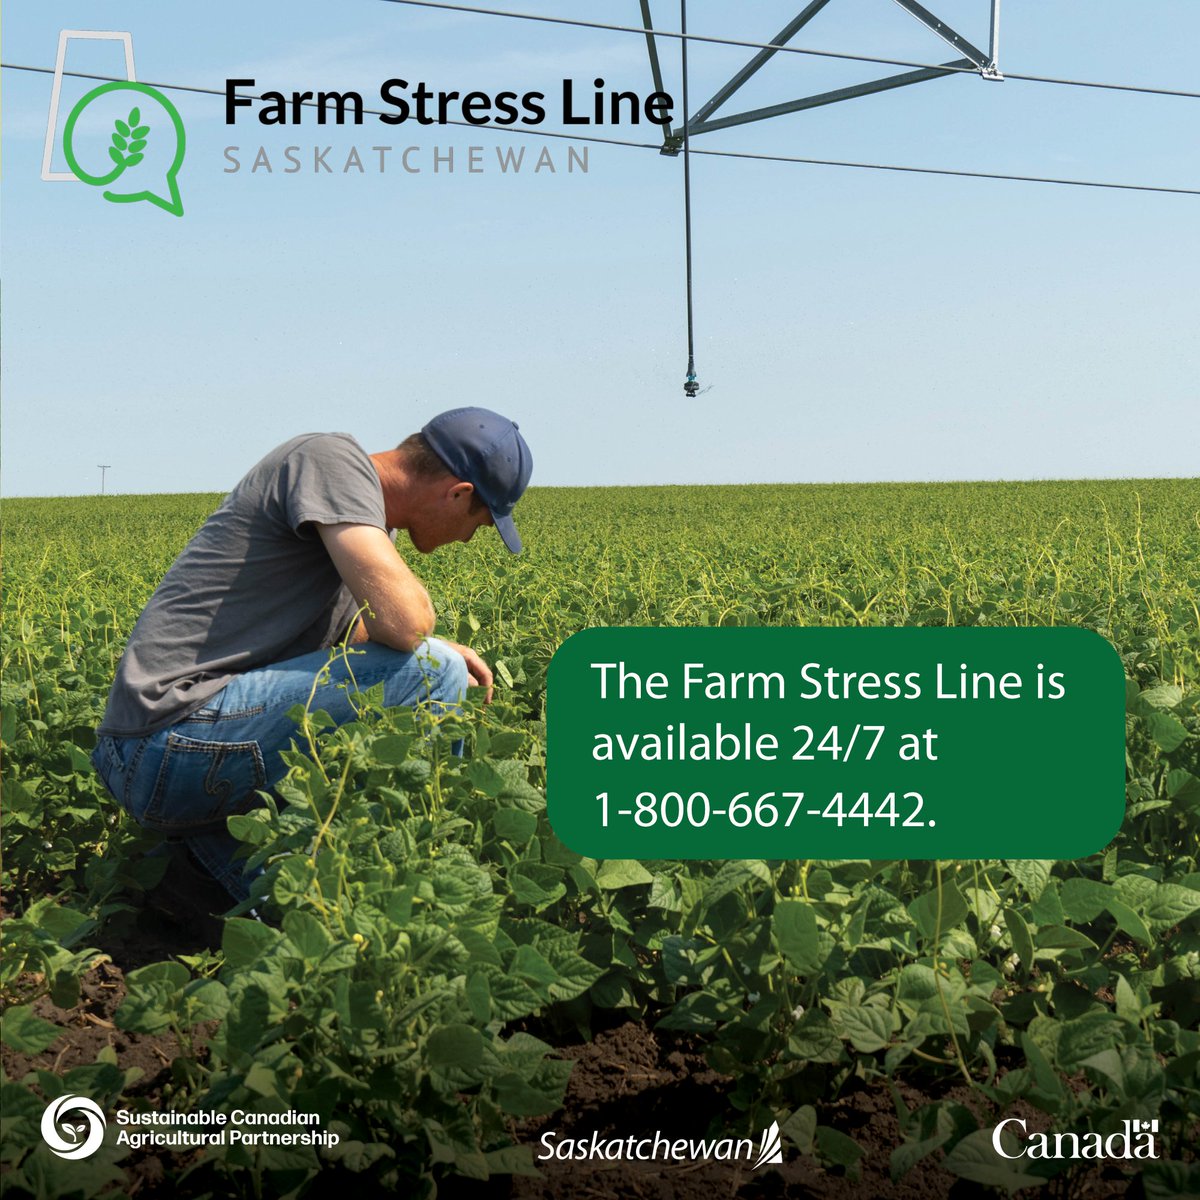 The Farm Stress Line is here to help. It is confidential with no call display. Don’t suffer alone, call today. saskatchewan.ca/business/agric… @AAFC_Canada #FarmstressLine #SustainableCdnAg #SaskAg